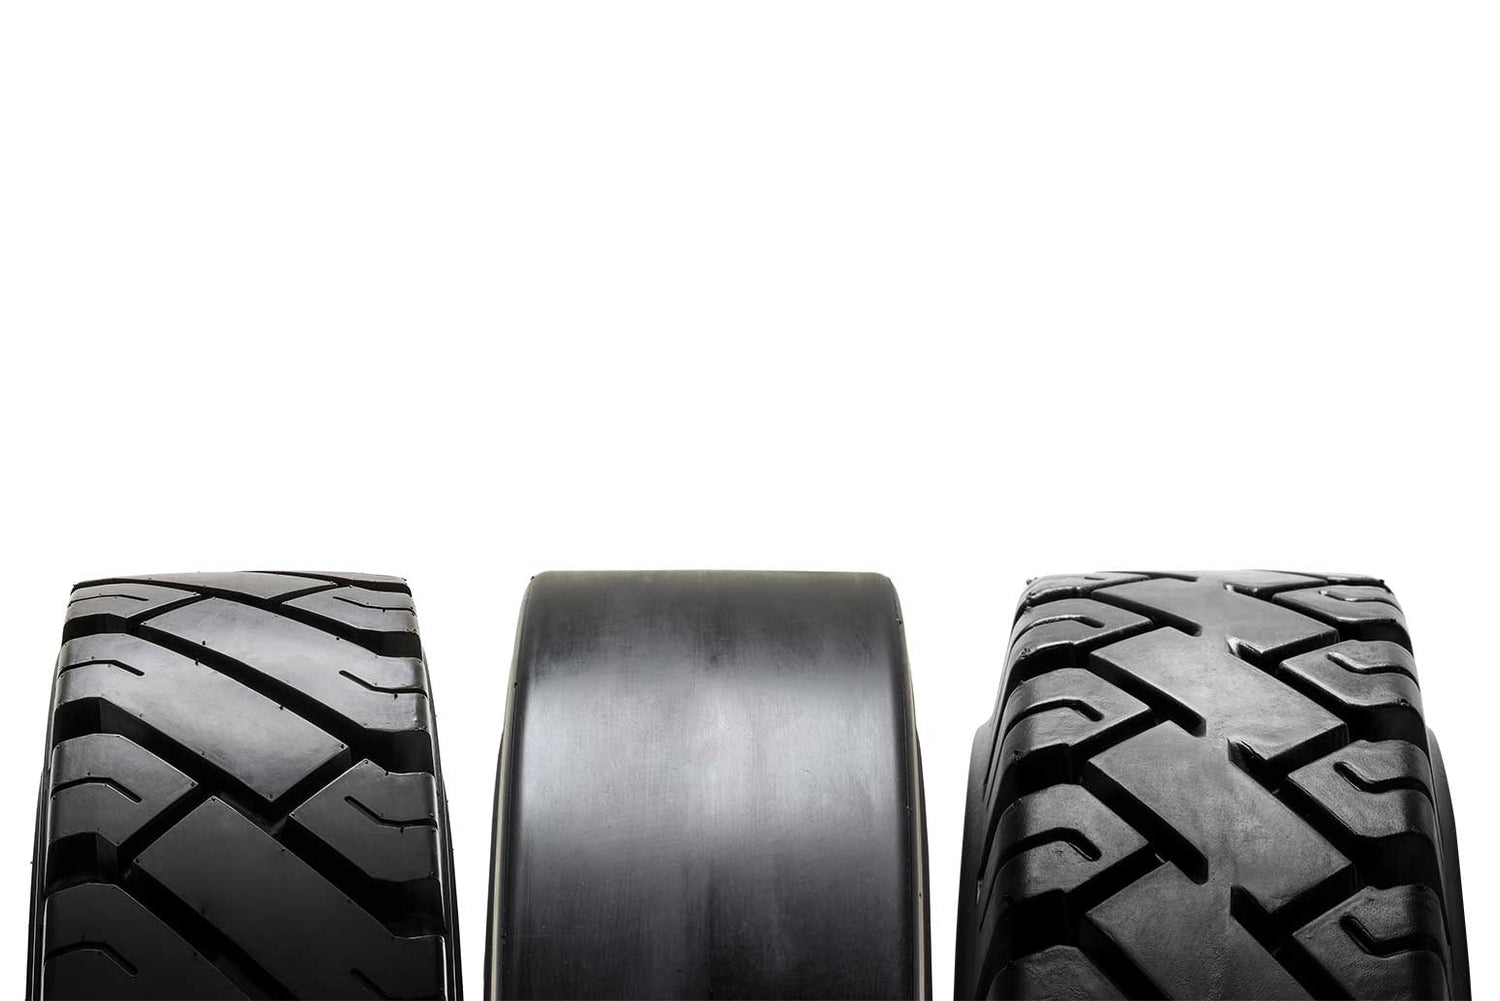 We carry a wide variety of quality forklift tires for all applications